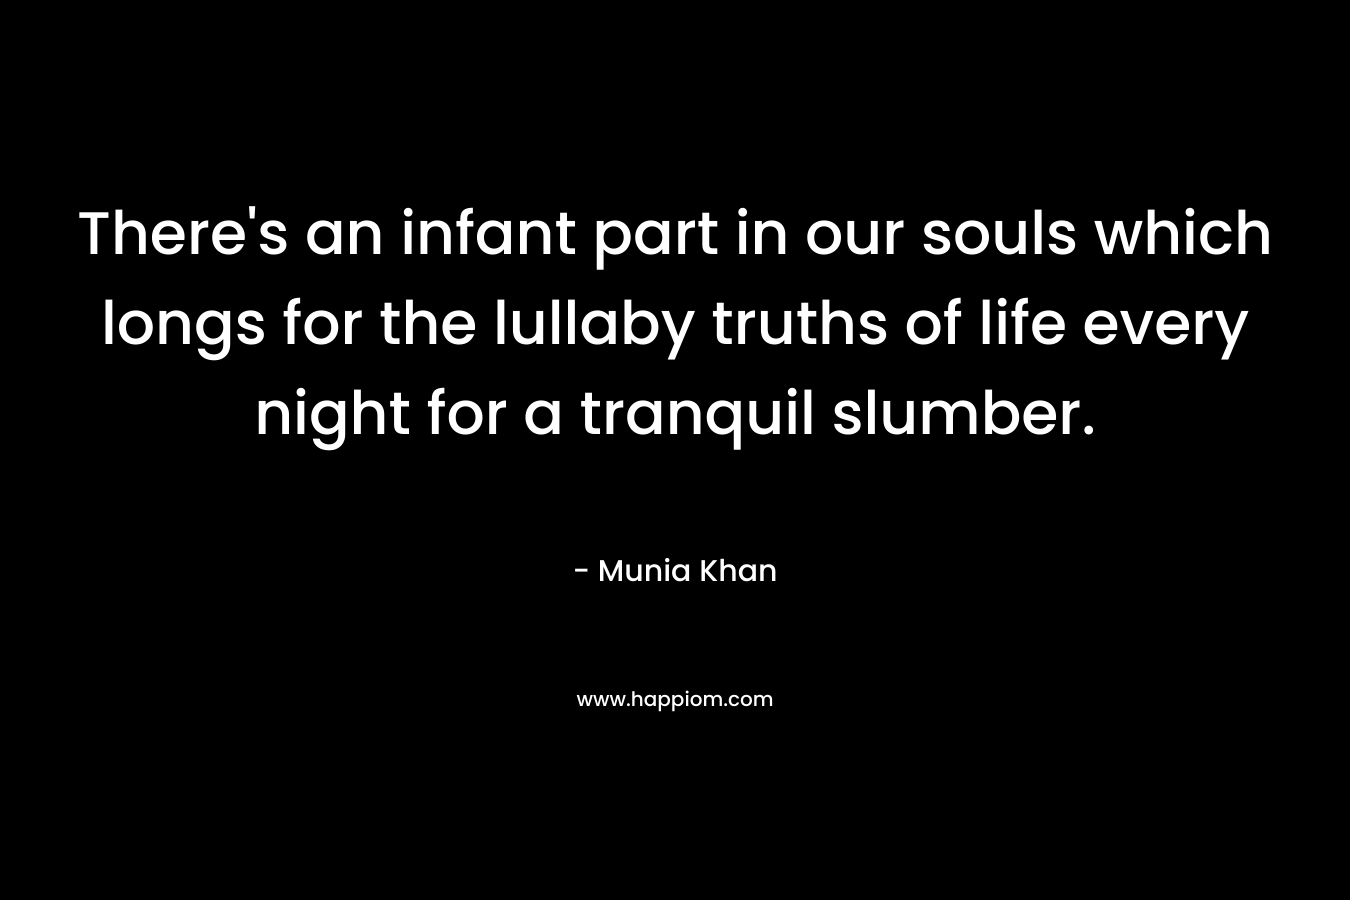 There’s an infant part in our souls which longs for the lullaby truths of life every night for a tranquil slumber. – Munia Khan